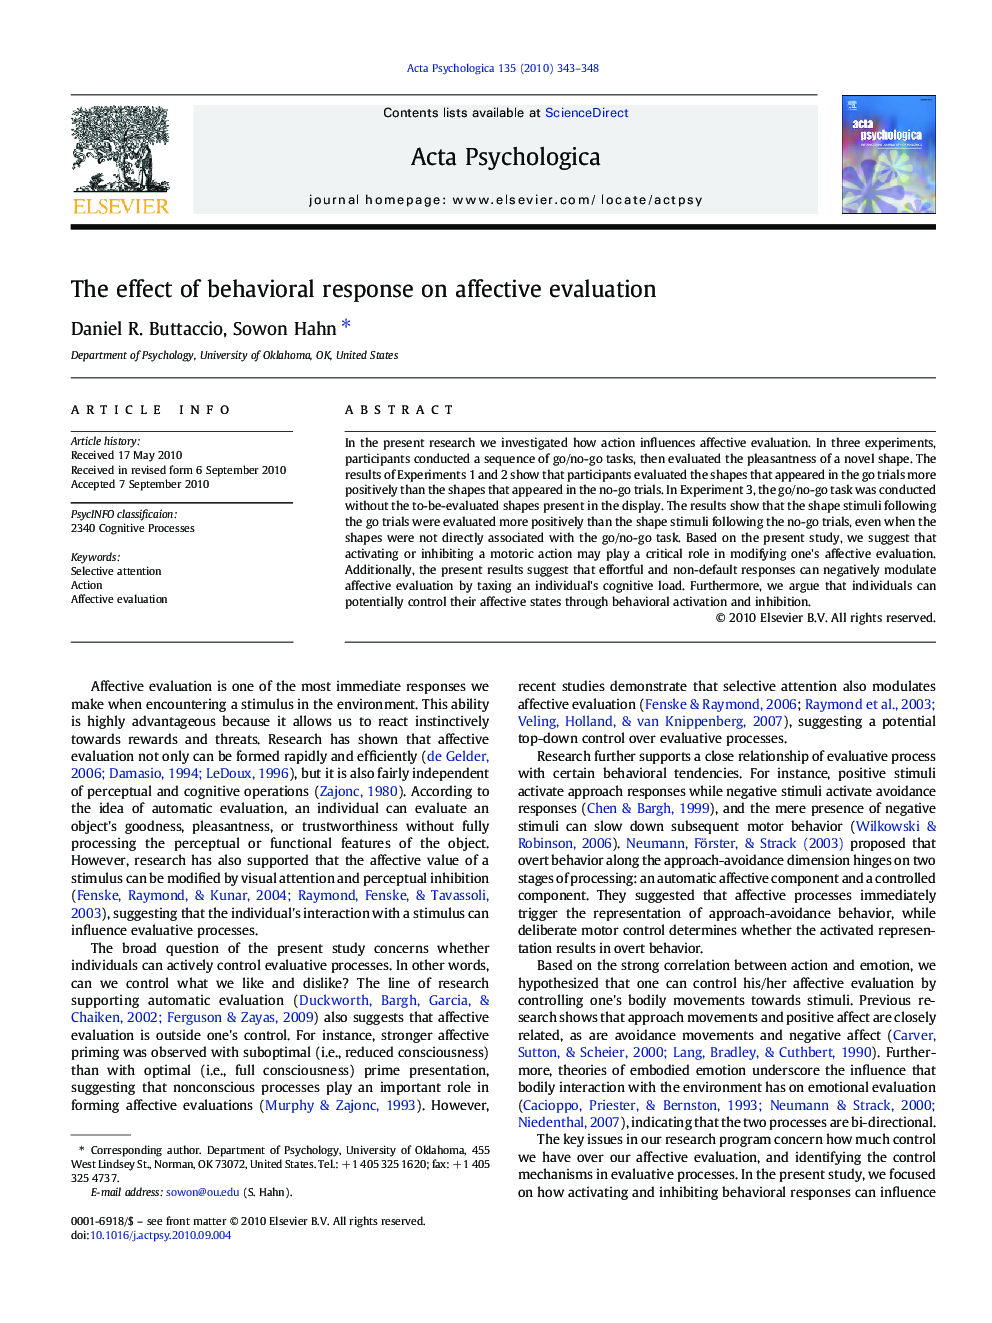 The effect of behavioral response on affective evaluation